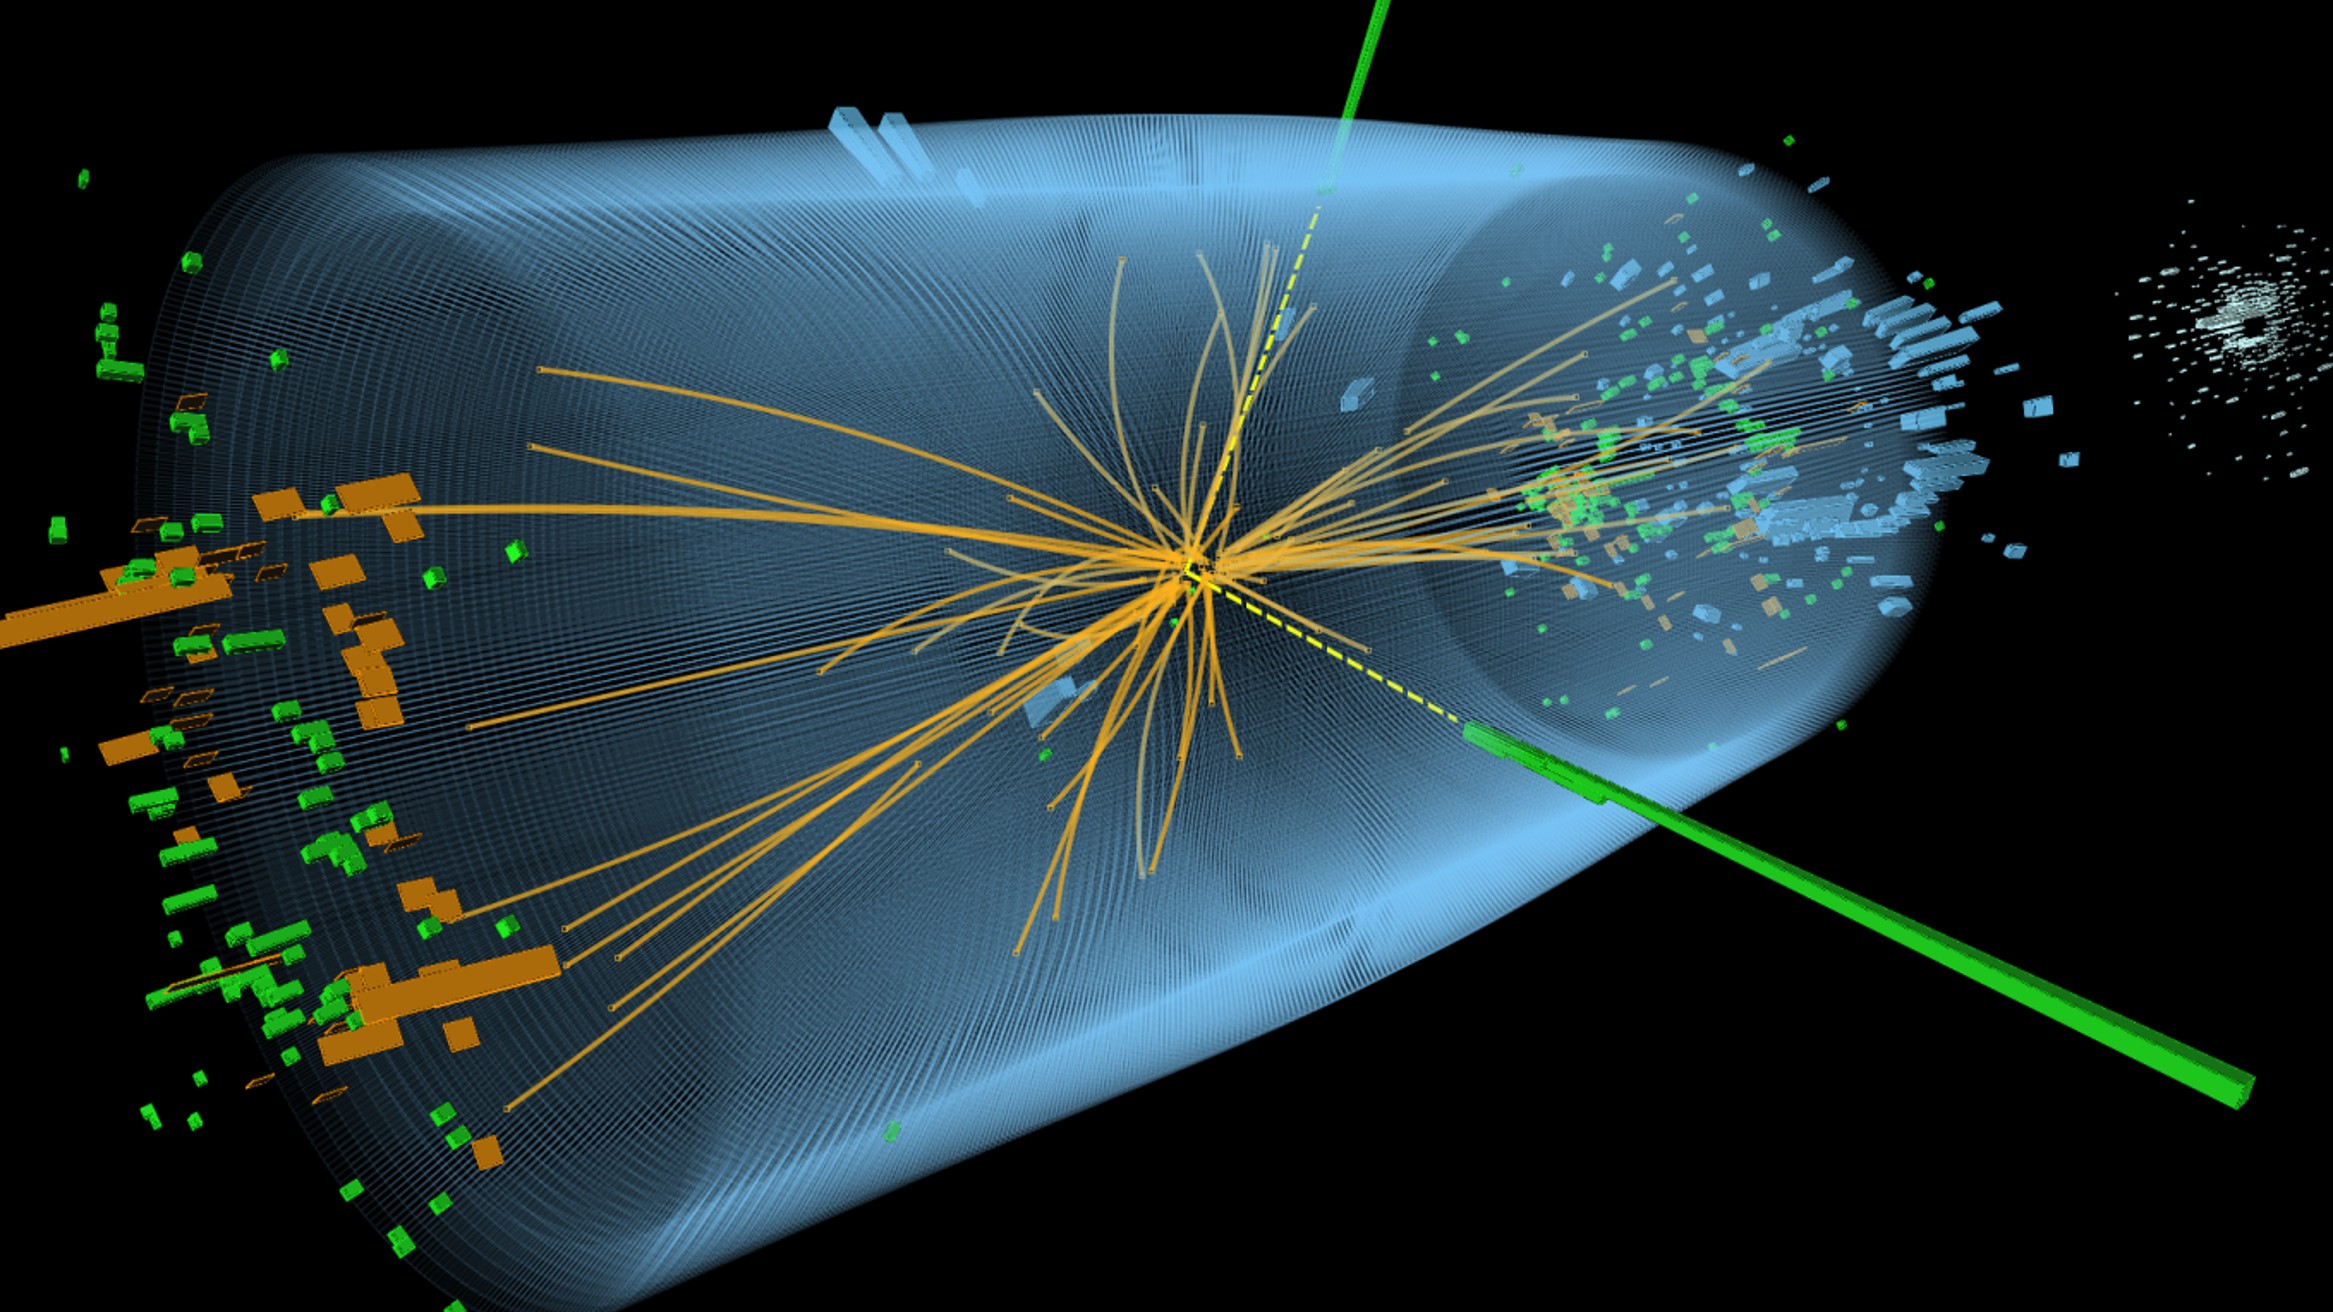 A computerized image of the collision of two particles and the decay of the Higgs boson during a test event at CERN.  Photons are represented by yellow lines and green constellations radiating from the collision.